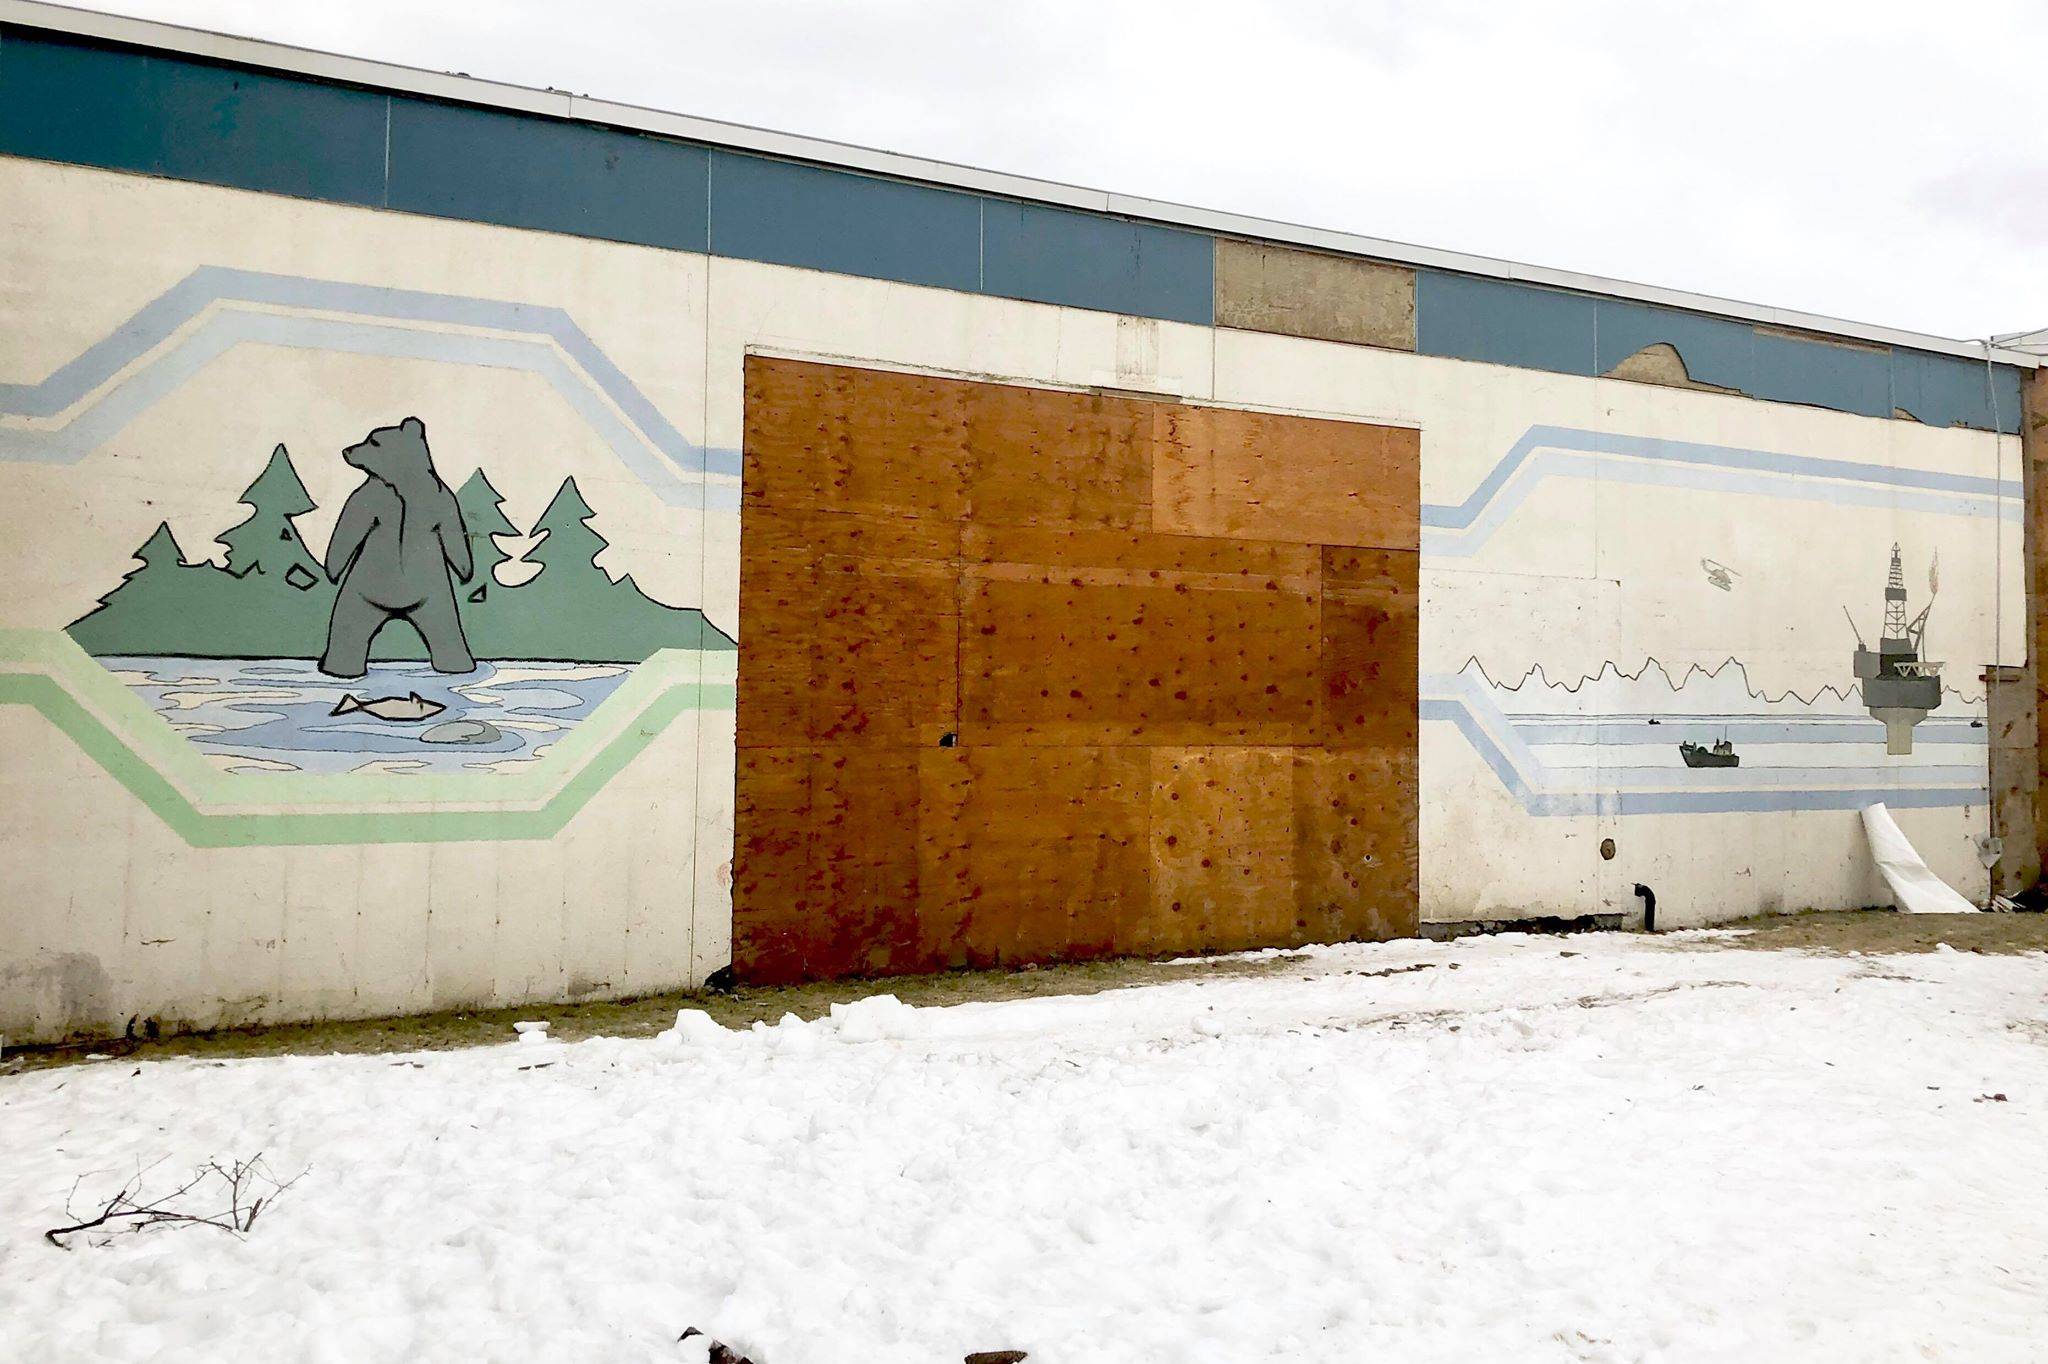 More panels of the hidden mural were revealed Wednesday, as construction crews work on the remodel at the Kenai Municipal Airport. (Photo by Victoria Petersen/Peninsula Clarion)